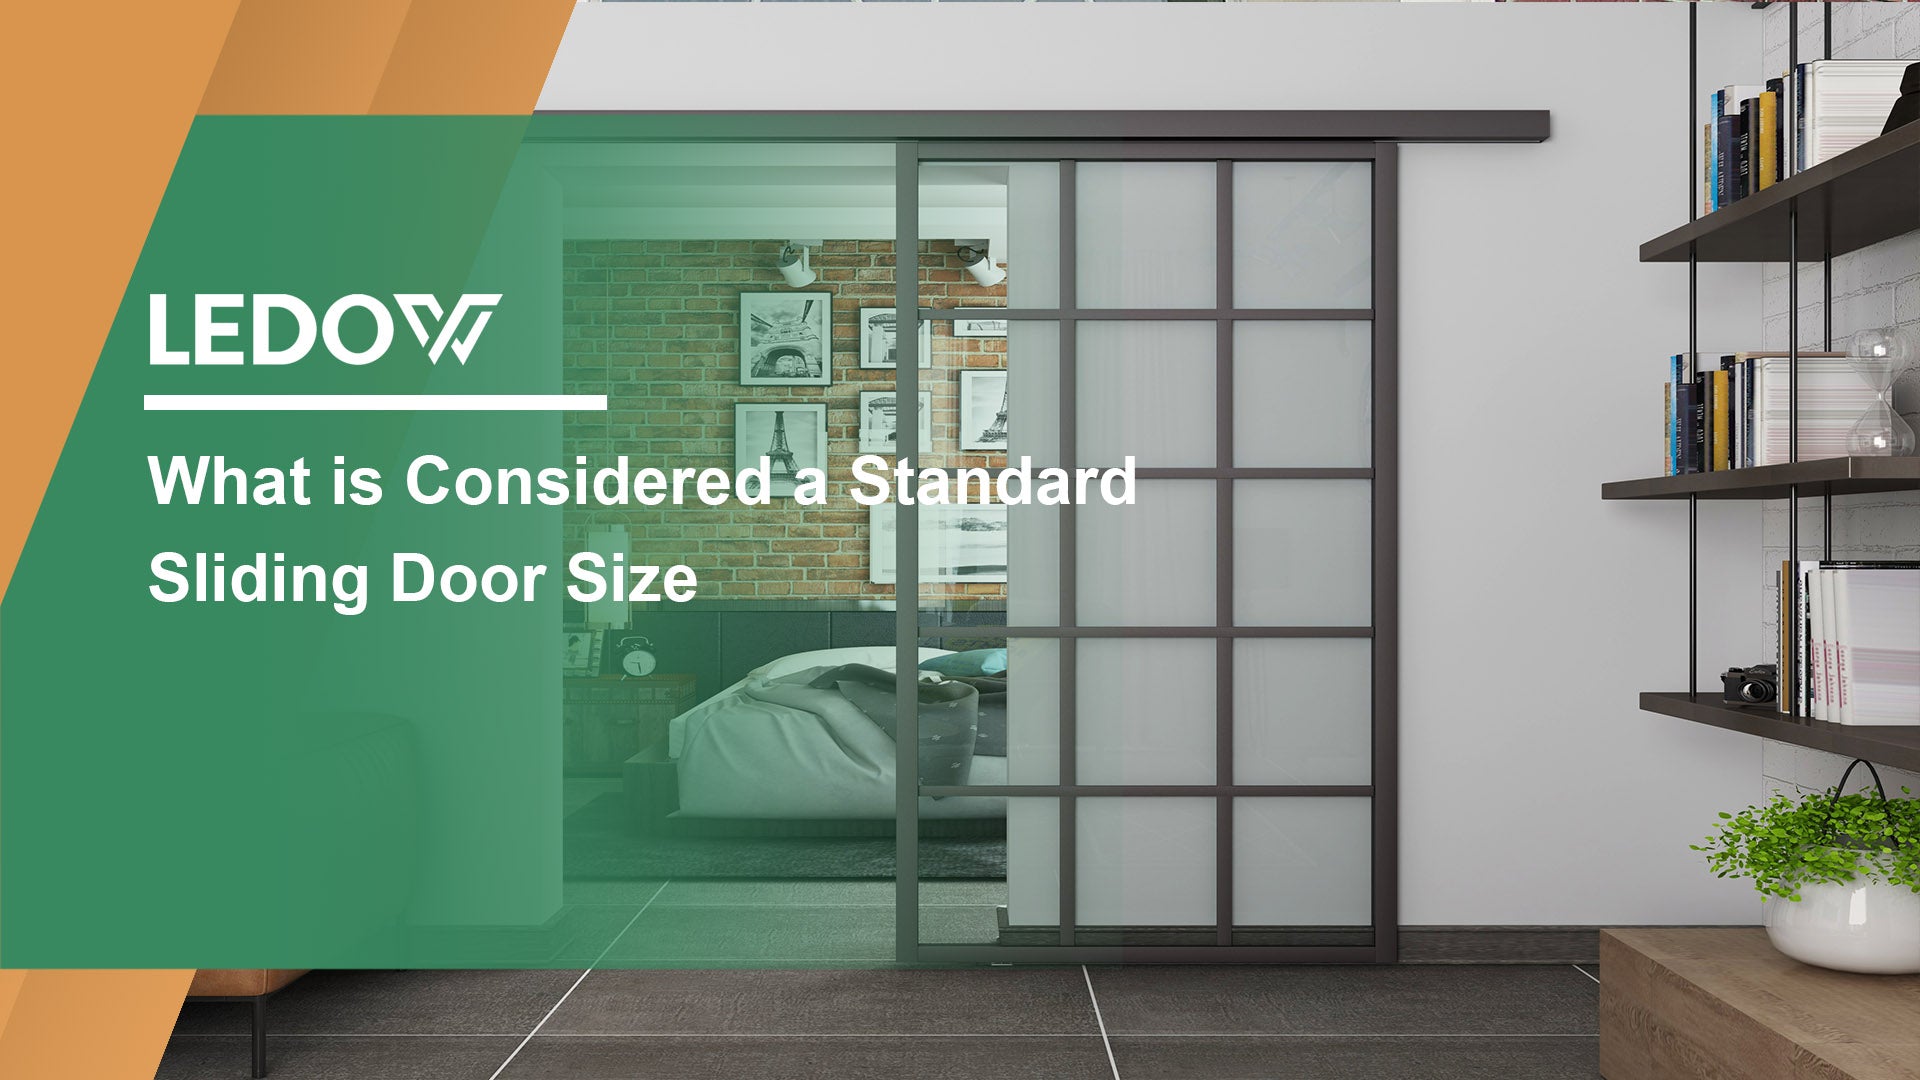 What is Considered a Standard Sliding Door Size?